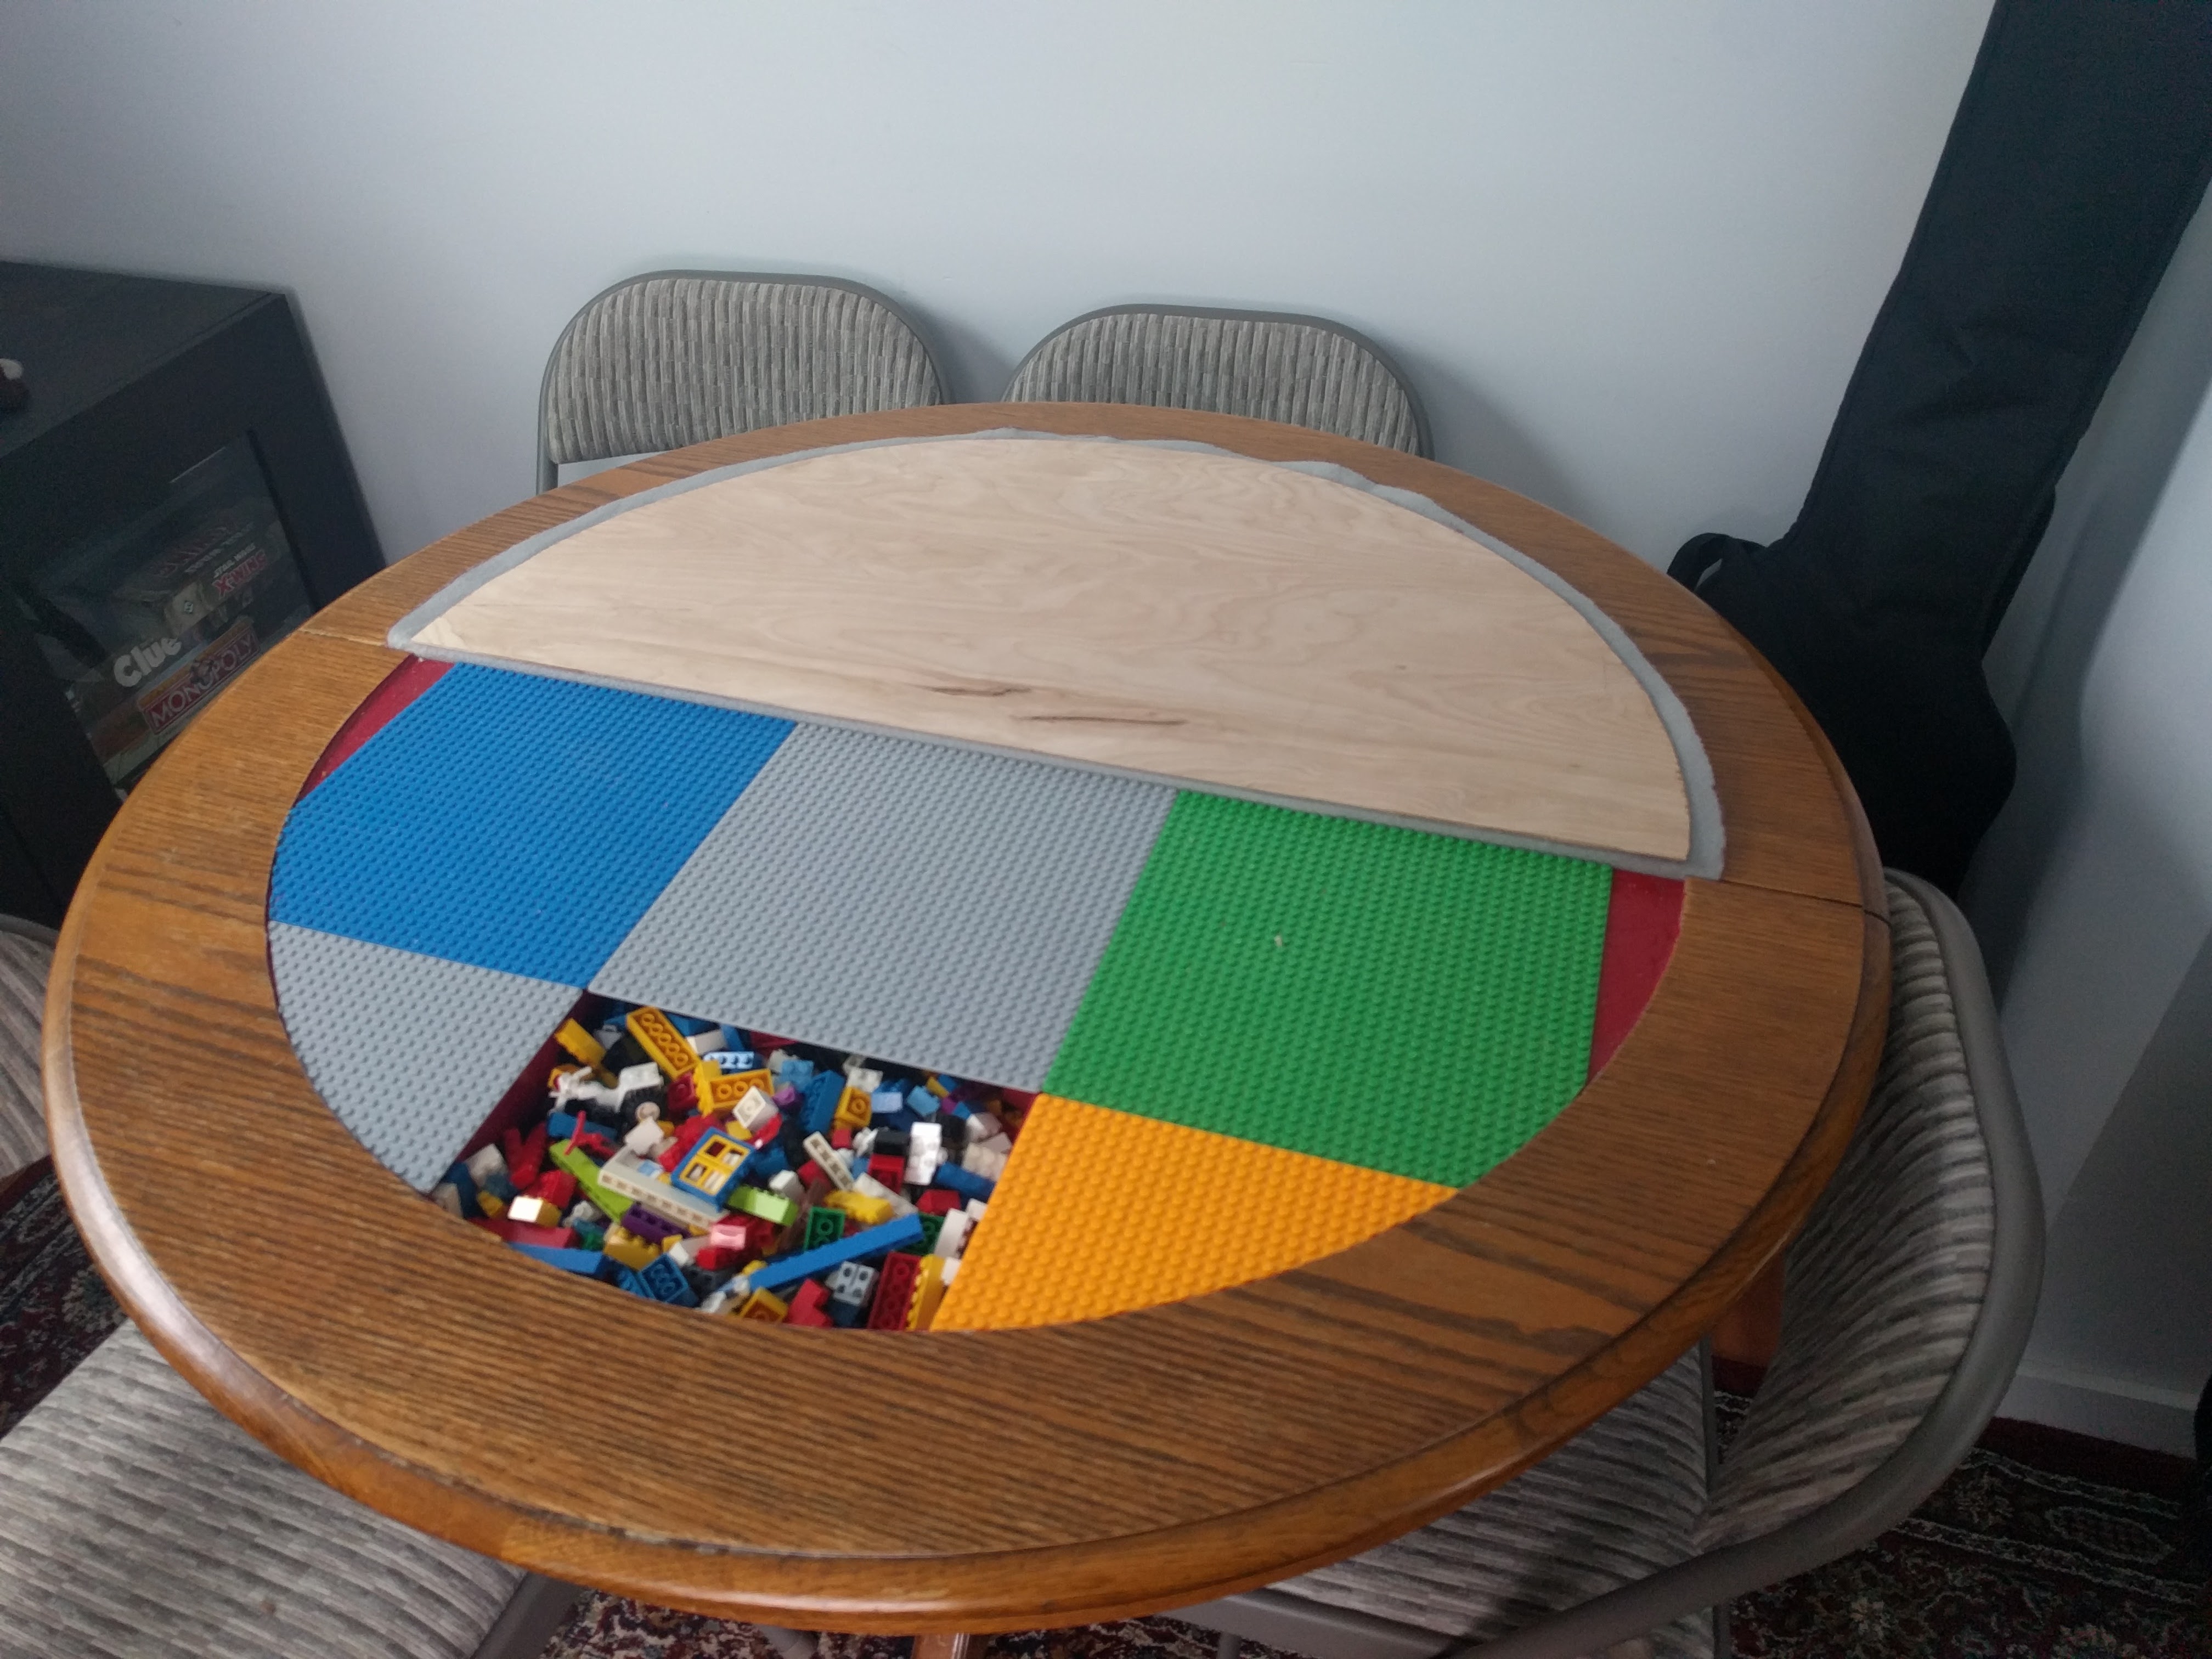 Easy access to legos means you can still have fun when you've been drinking too much to play board games!